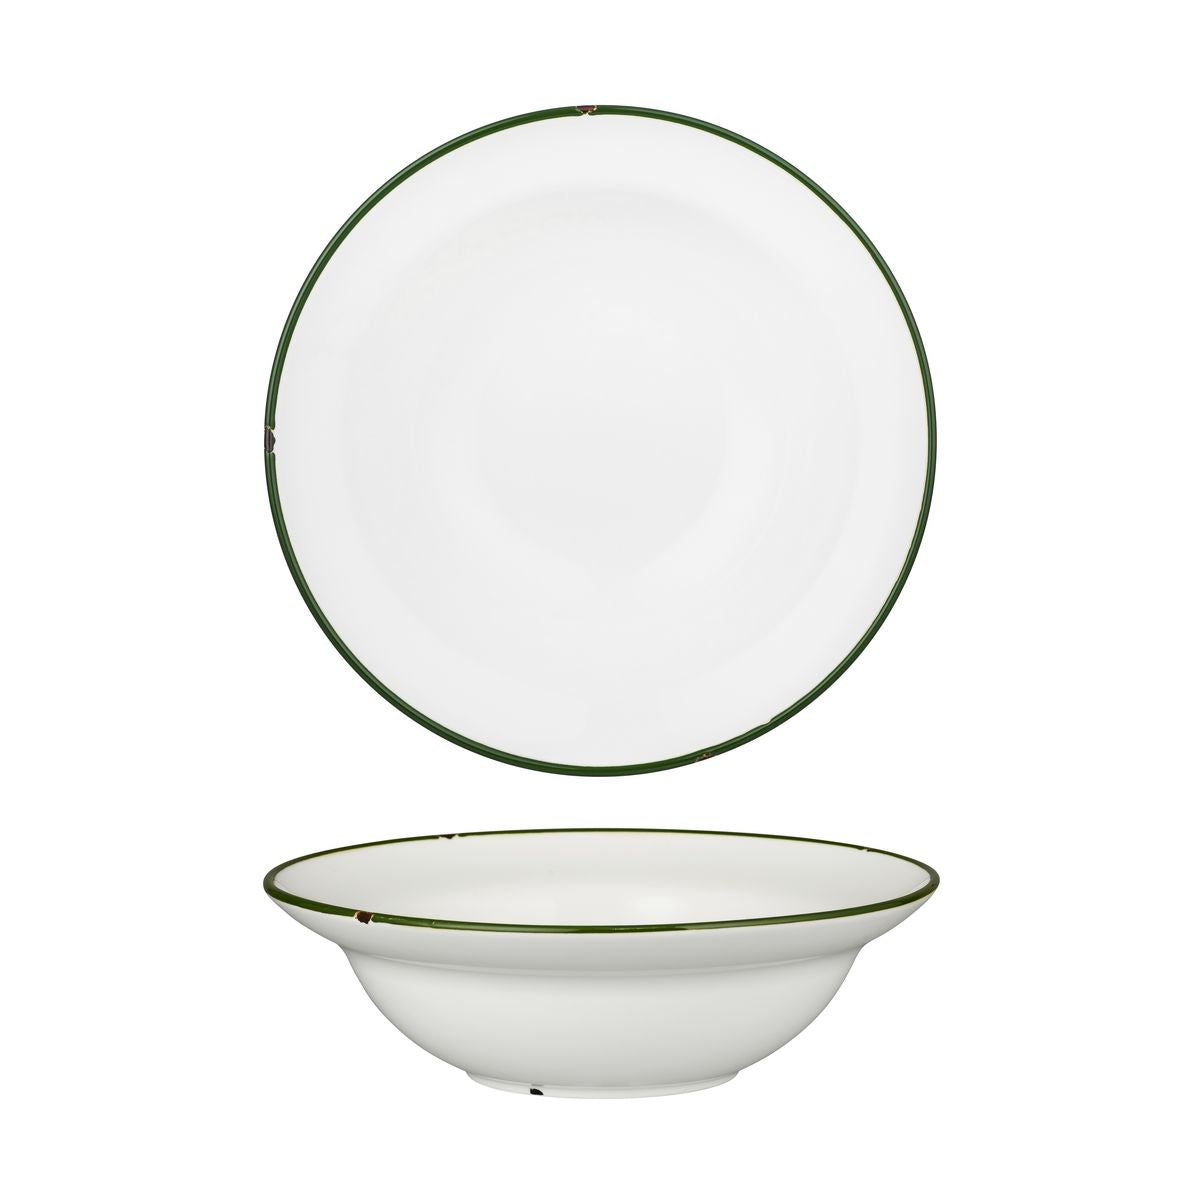 Deep Bowl Plate - 240mm, Tintin White & Green: Pack of 4